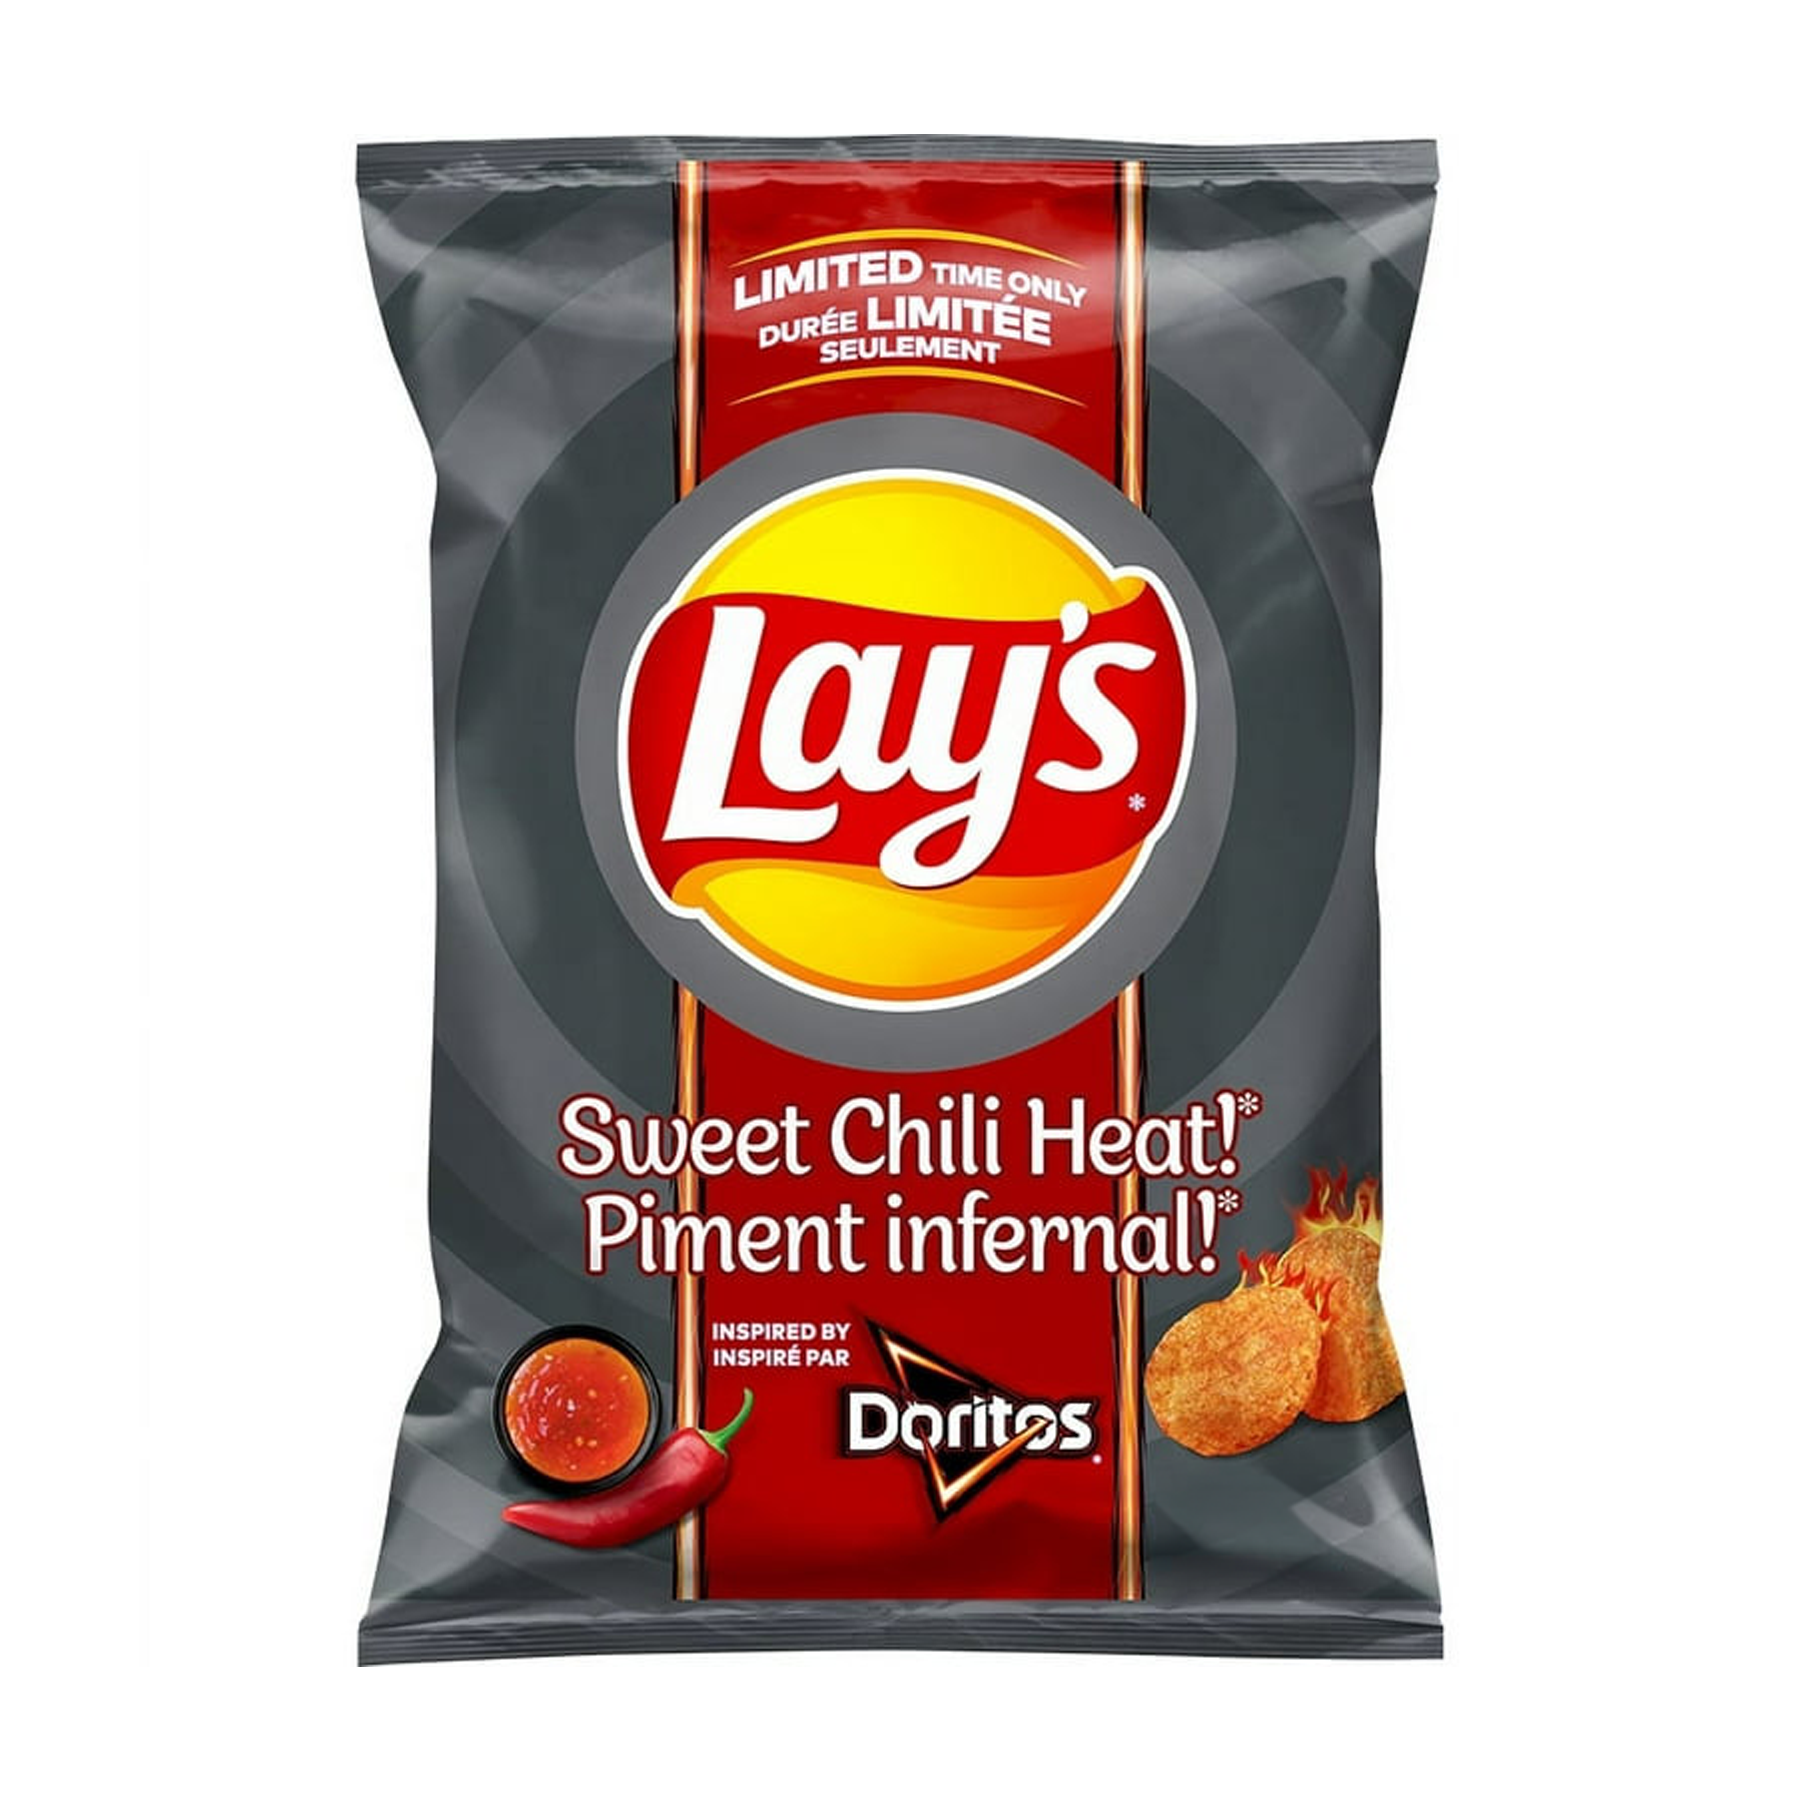 Lay's Sweet Chili Heat Doritos Flavored Chips (66g)